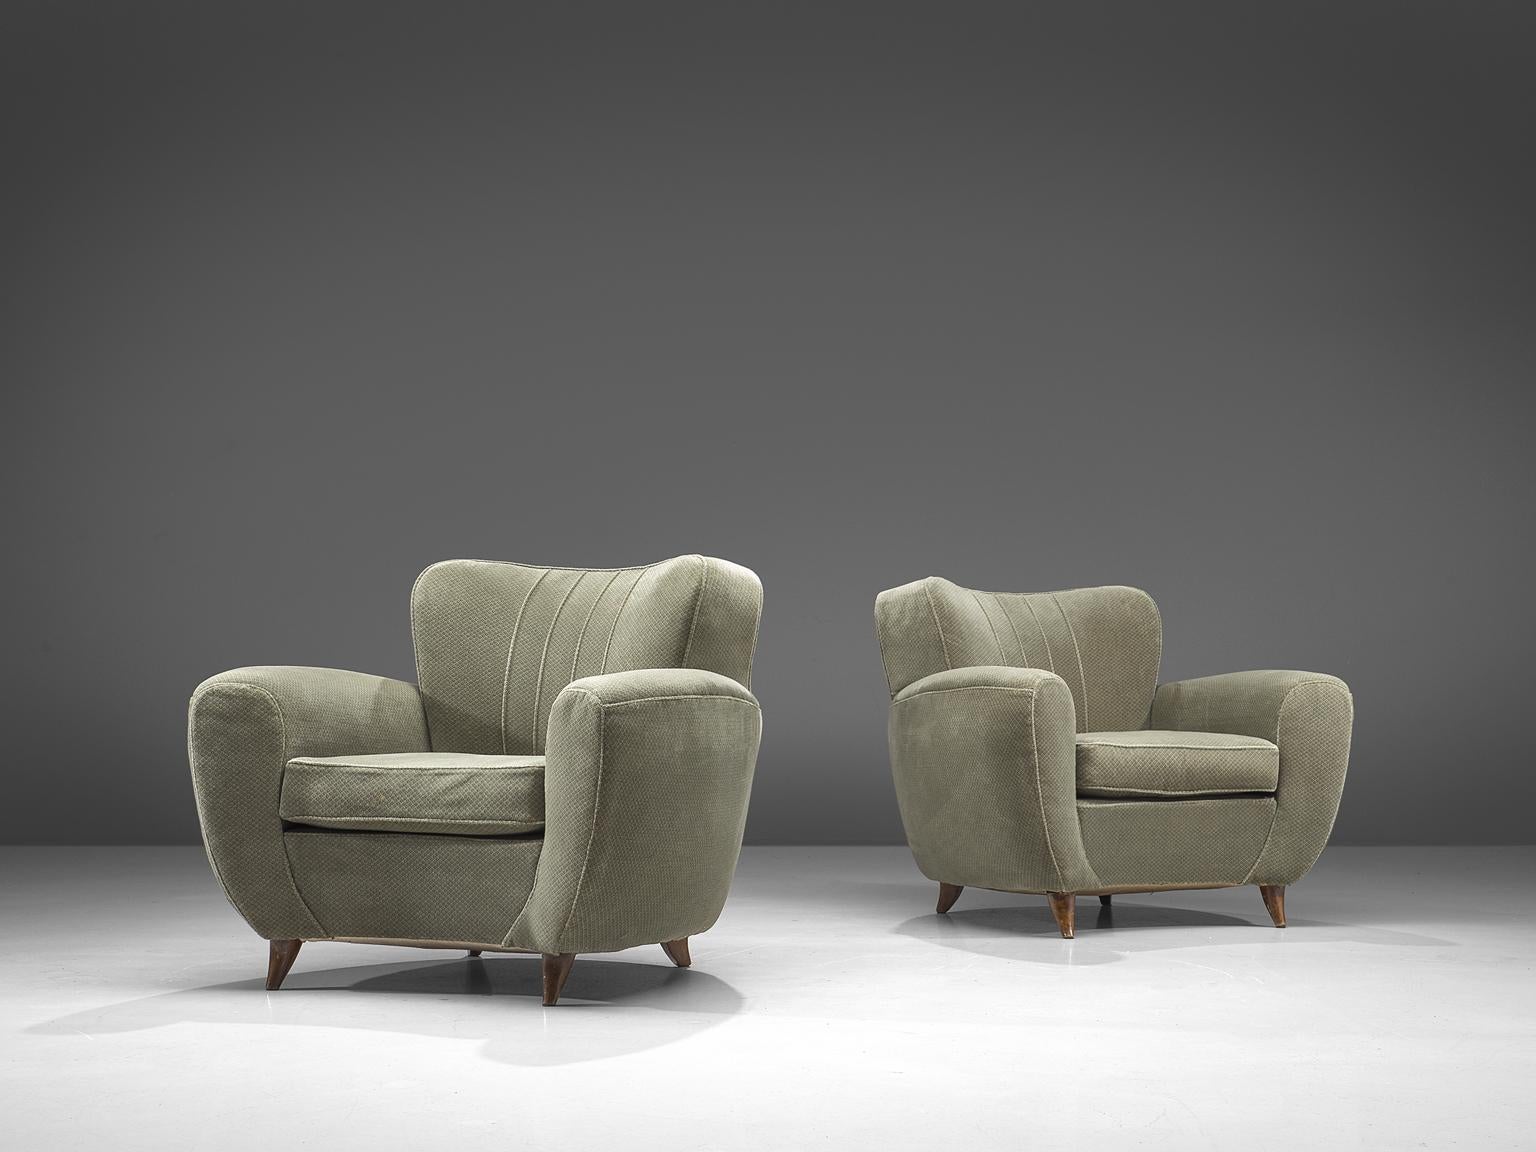 Set of lounge chairs, green fabric and wood, Italy, 1950s.

Wide and comfortable chairs in a pastel green patterned fabric upholstery. A wonderful set of lounge chairs that feature a deep seat and rounded, curved armrests. The backrest is voluptuous